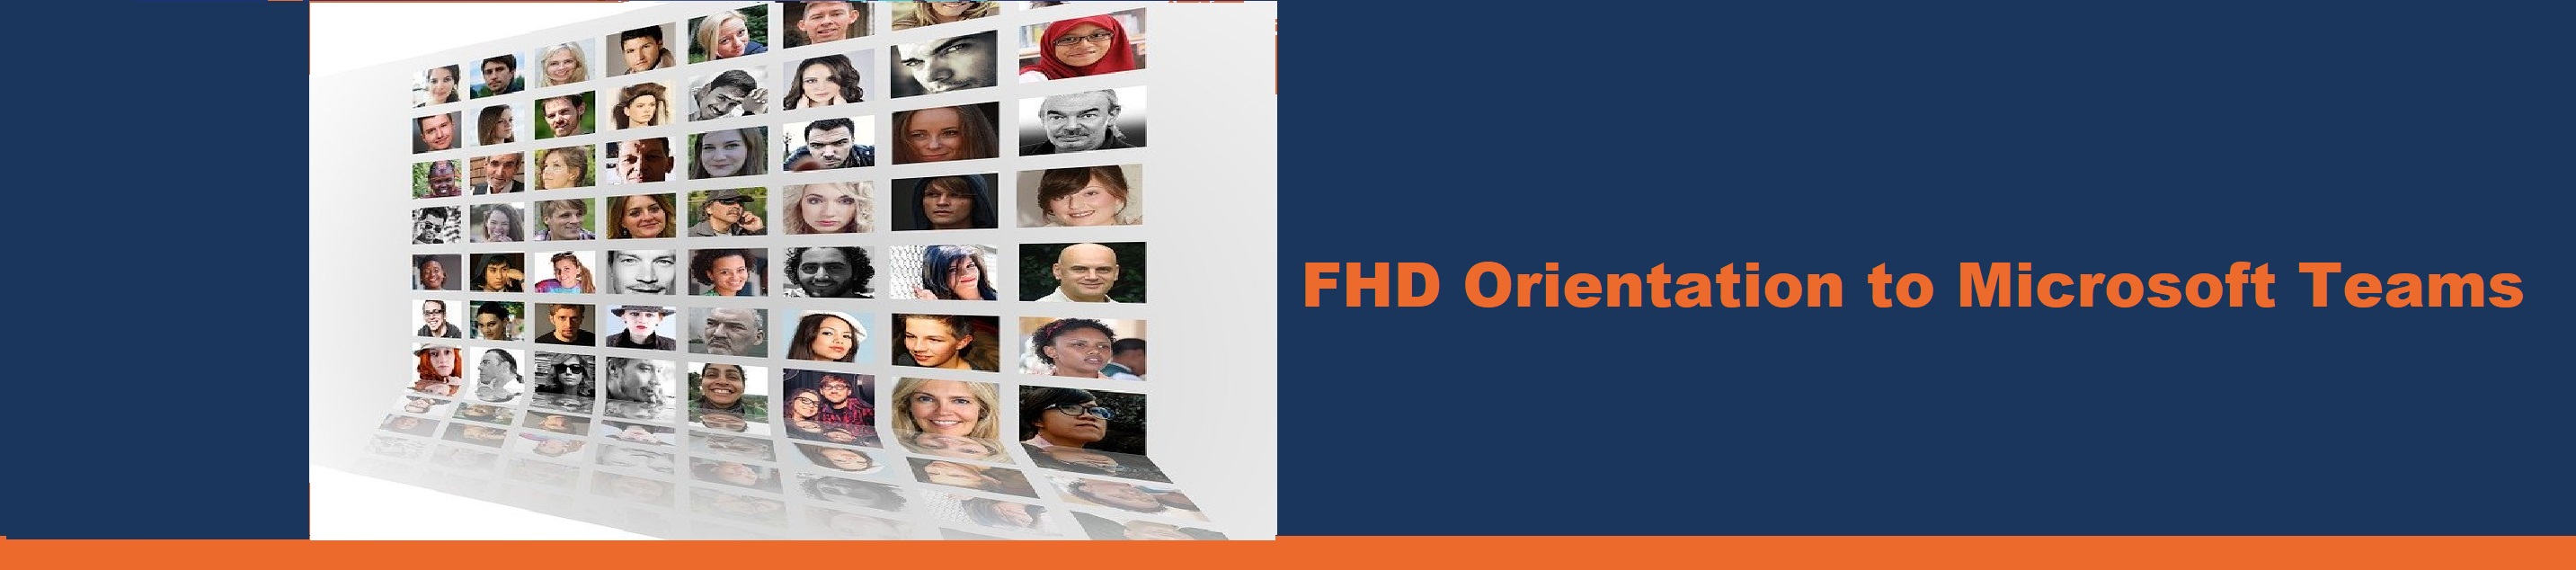 Image that represents Microsoft Teams Orientation. It shows the many multicultural faces that are becoming a computer screen. The title states: FHD Orientation to Microsoft Teams.